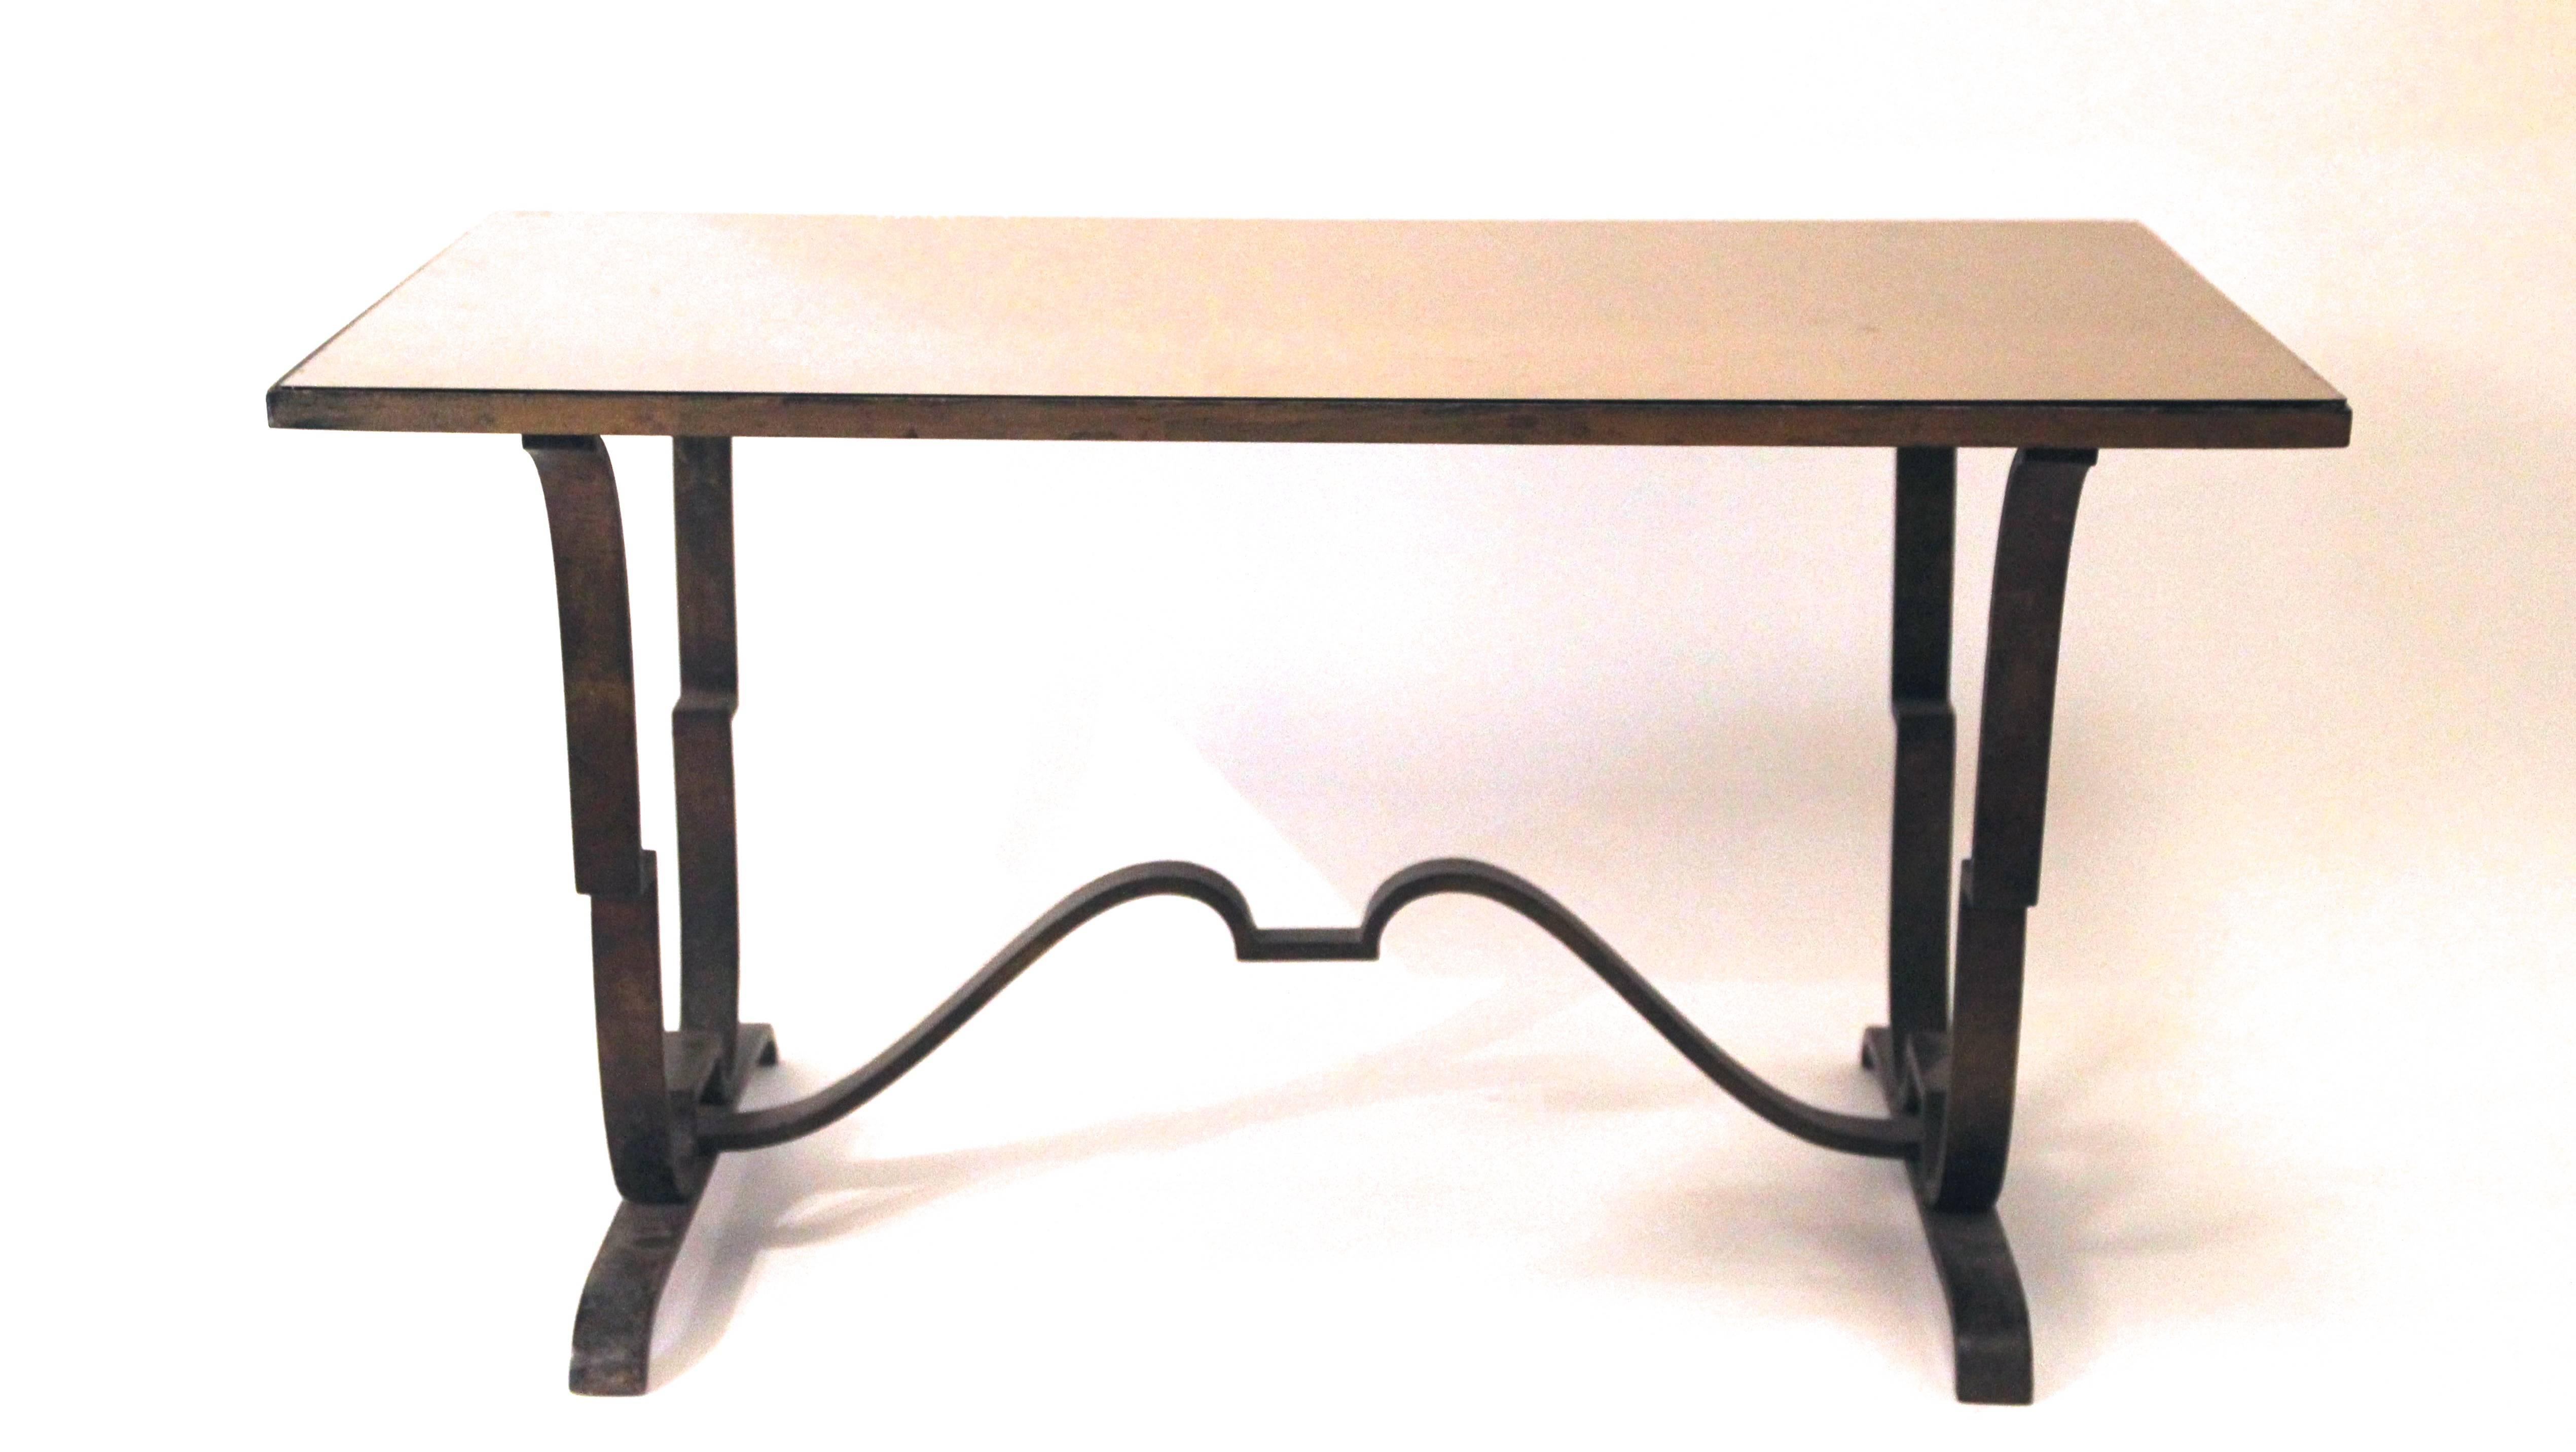 Raymond Subes,
Coffee table,
Iron and glass top,
circa 1970, France.
Measures: Height: 45 cm, width: 85 cm, depth: 46 cm.